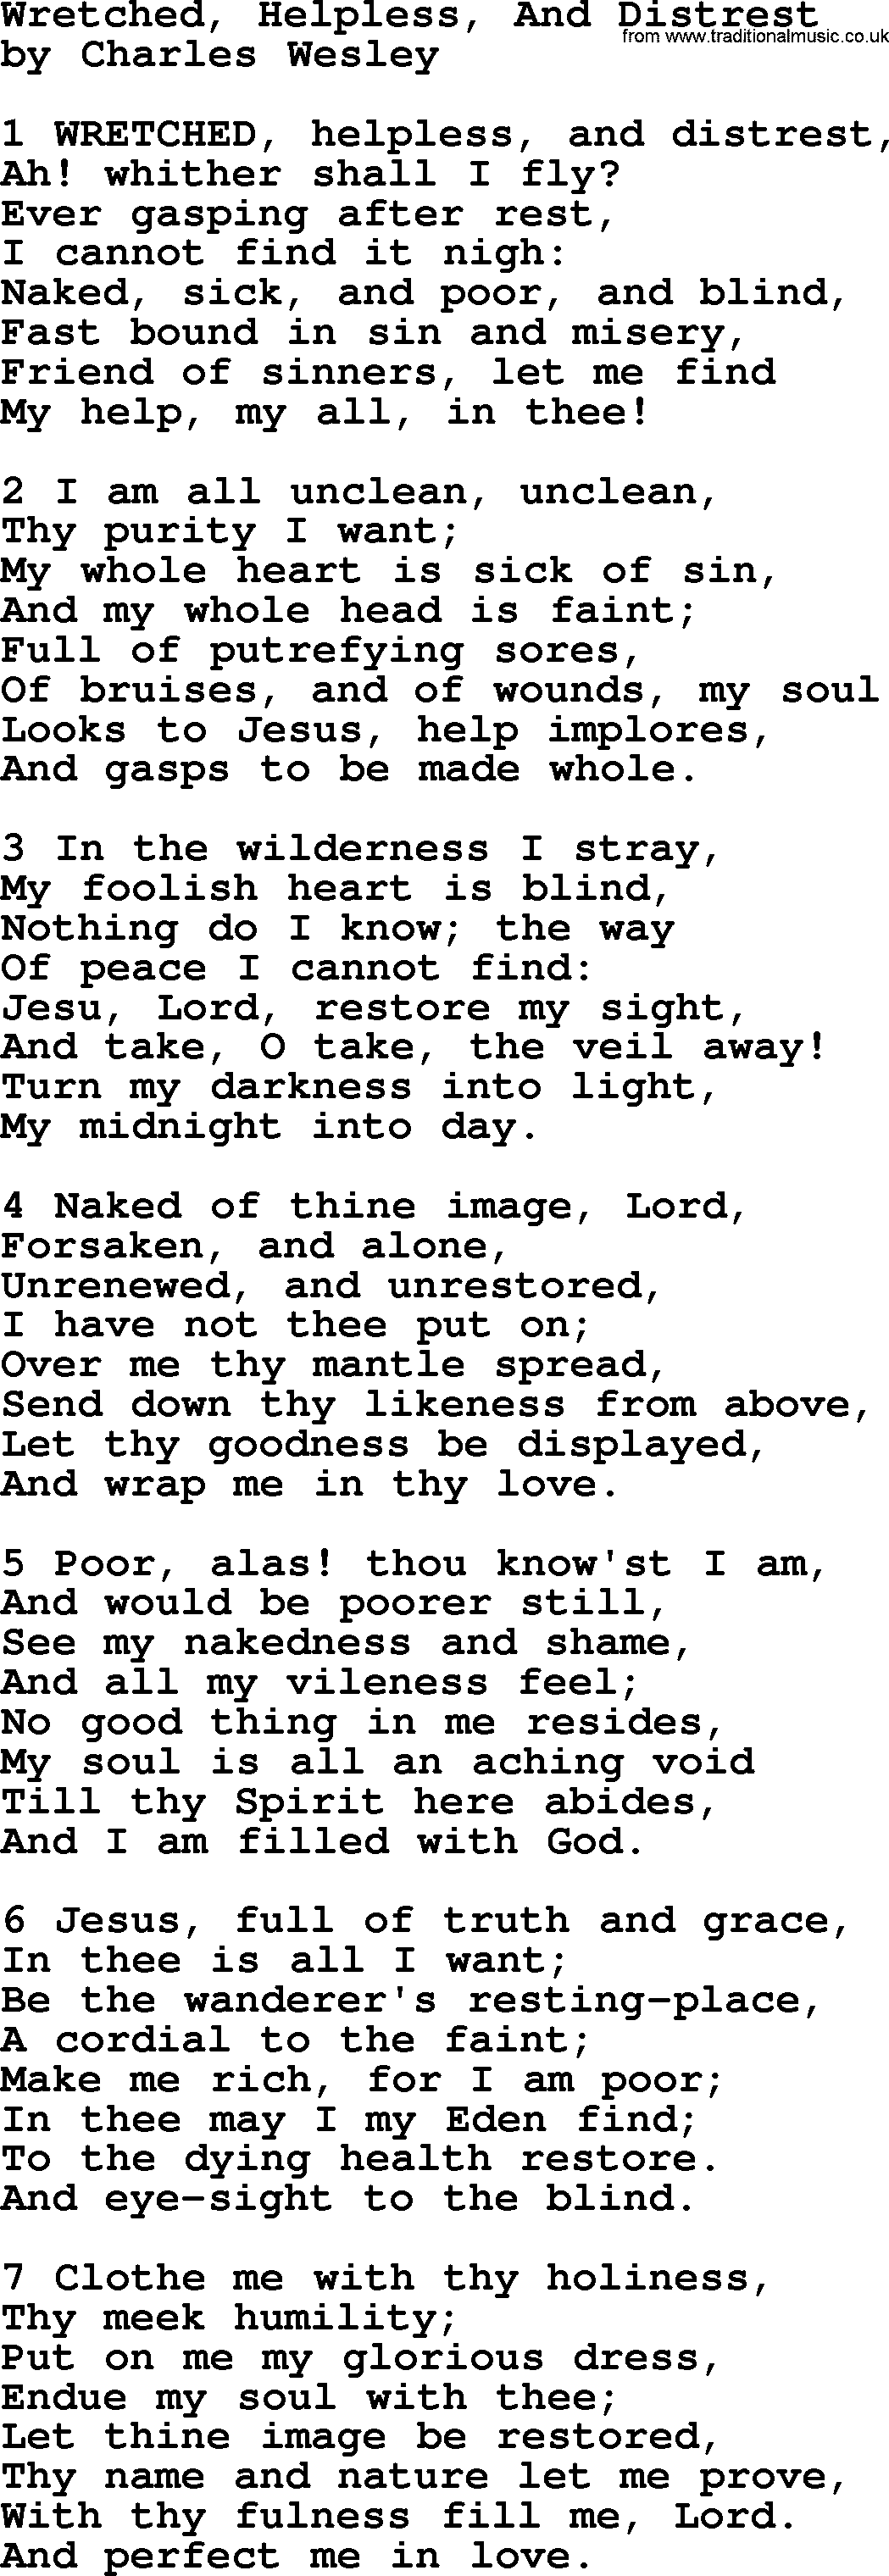 Charles Wesley hymn: Wretched, Helpless, And Distrest, lyrics